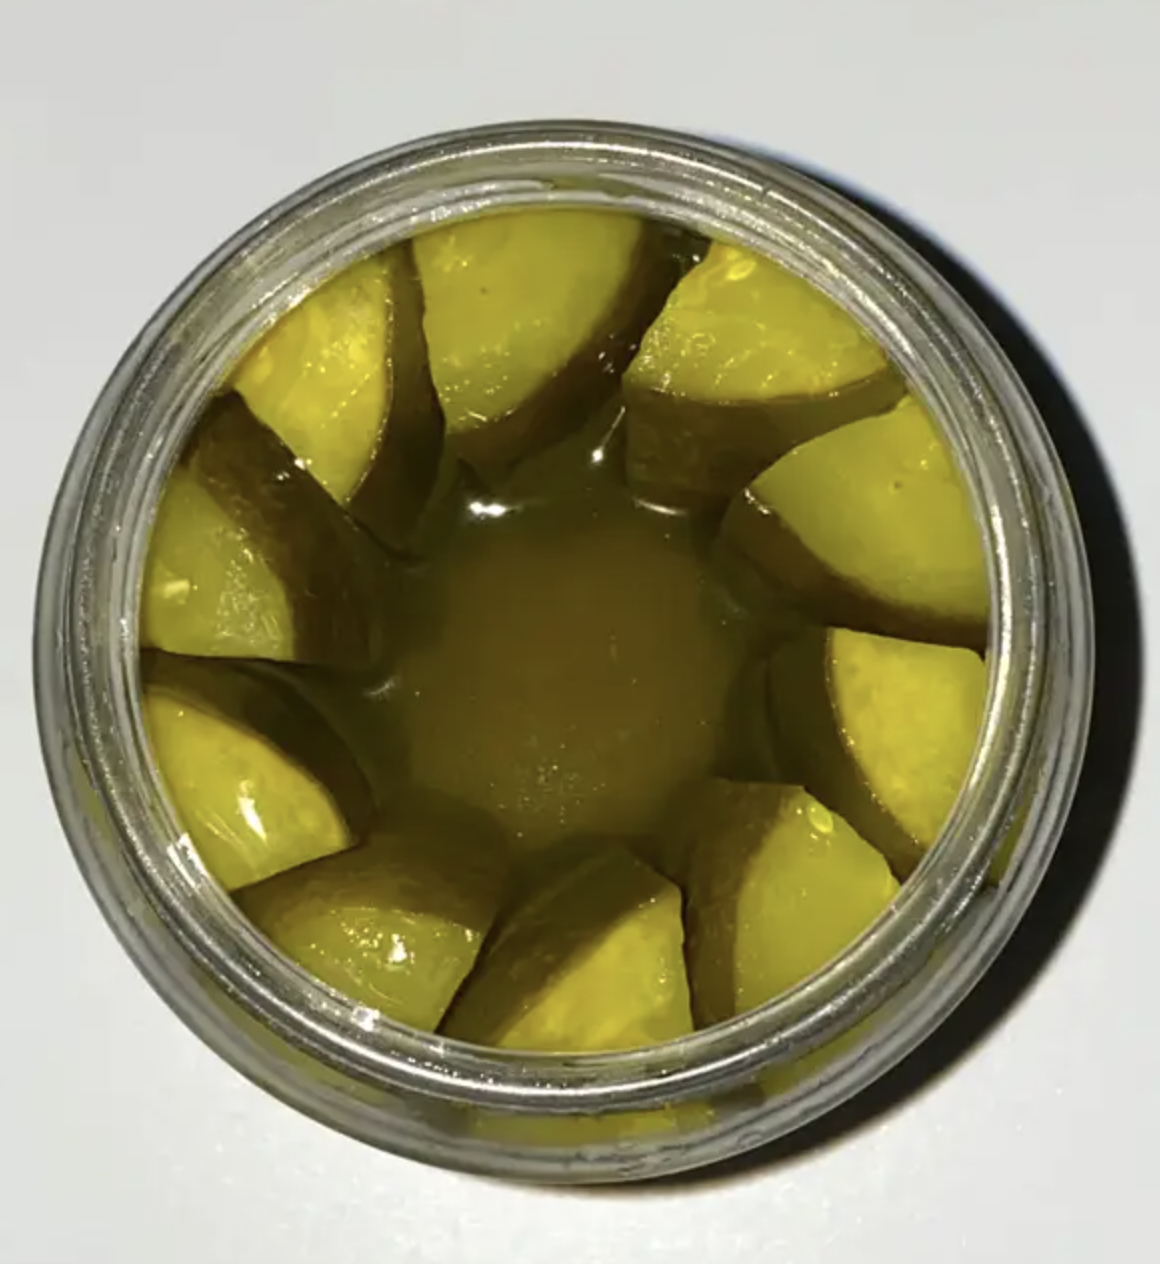 Top view of a jar filled with sliced pickles